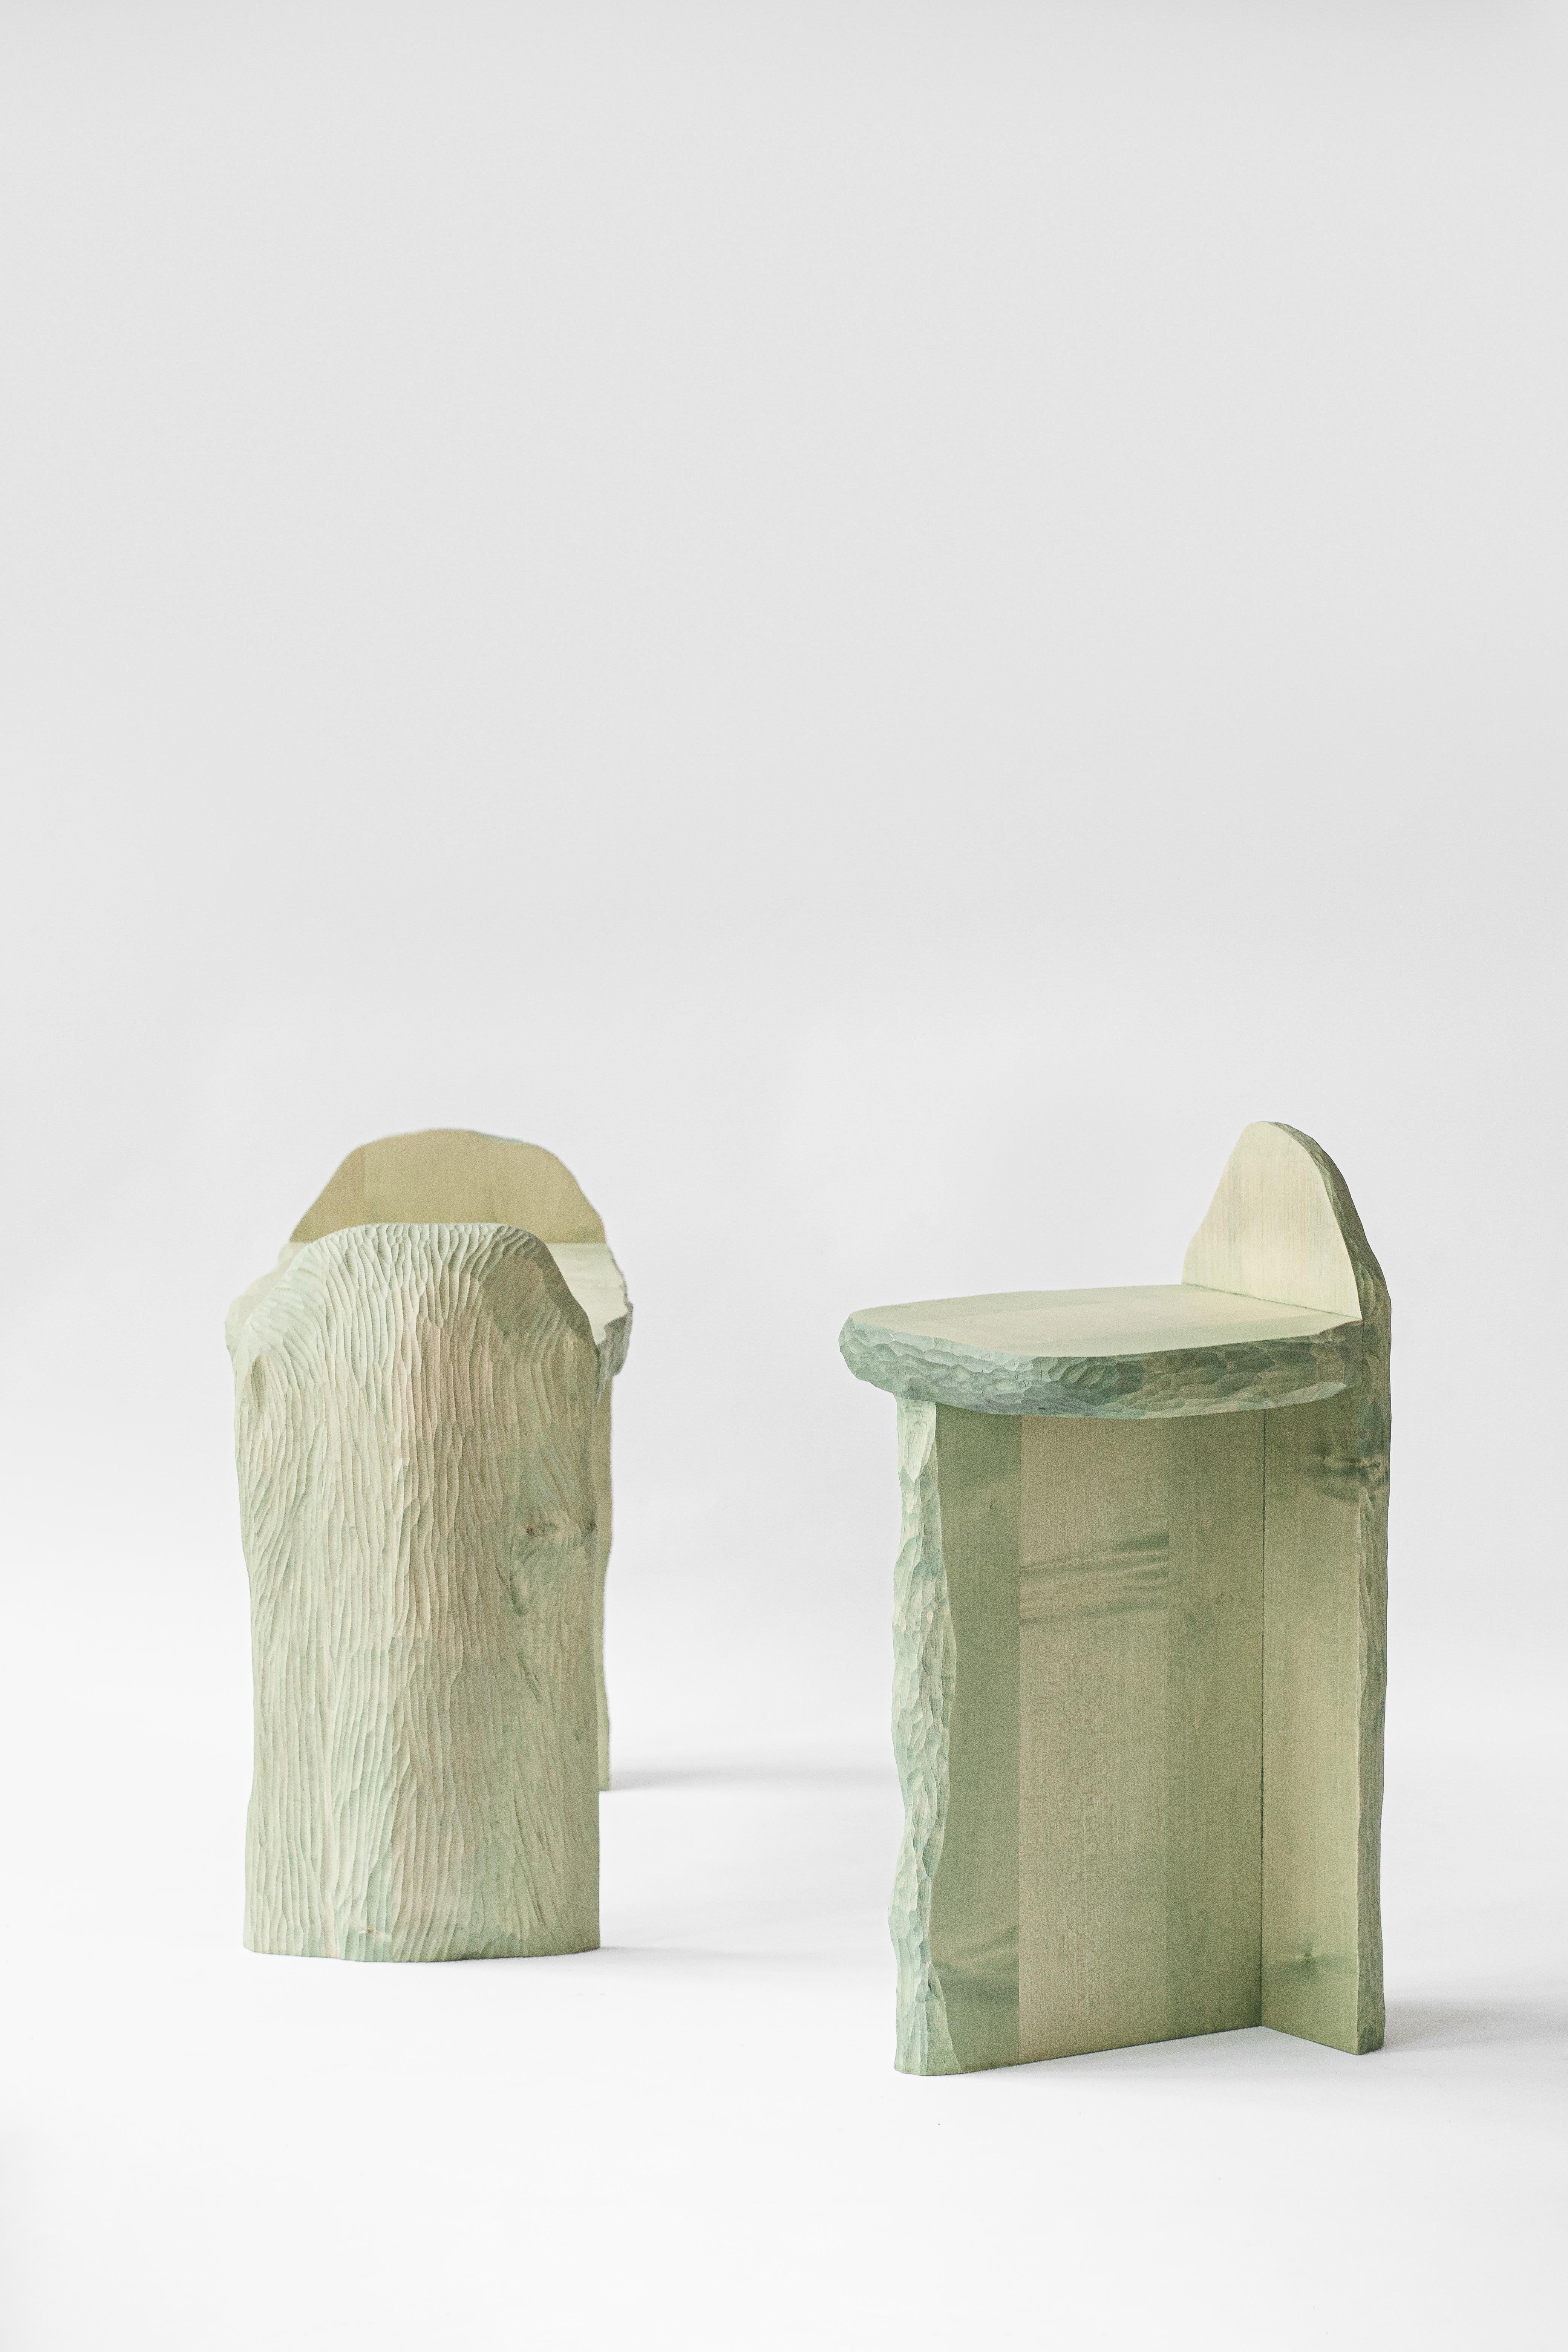 Contemporary sculpted wood dyed INTUITIVE ARCHAISME Stool by Cedric Breisacher For Sale 2